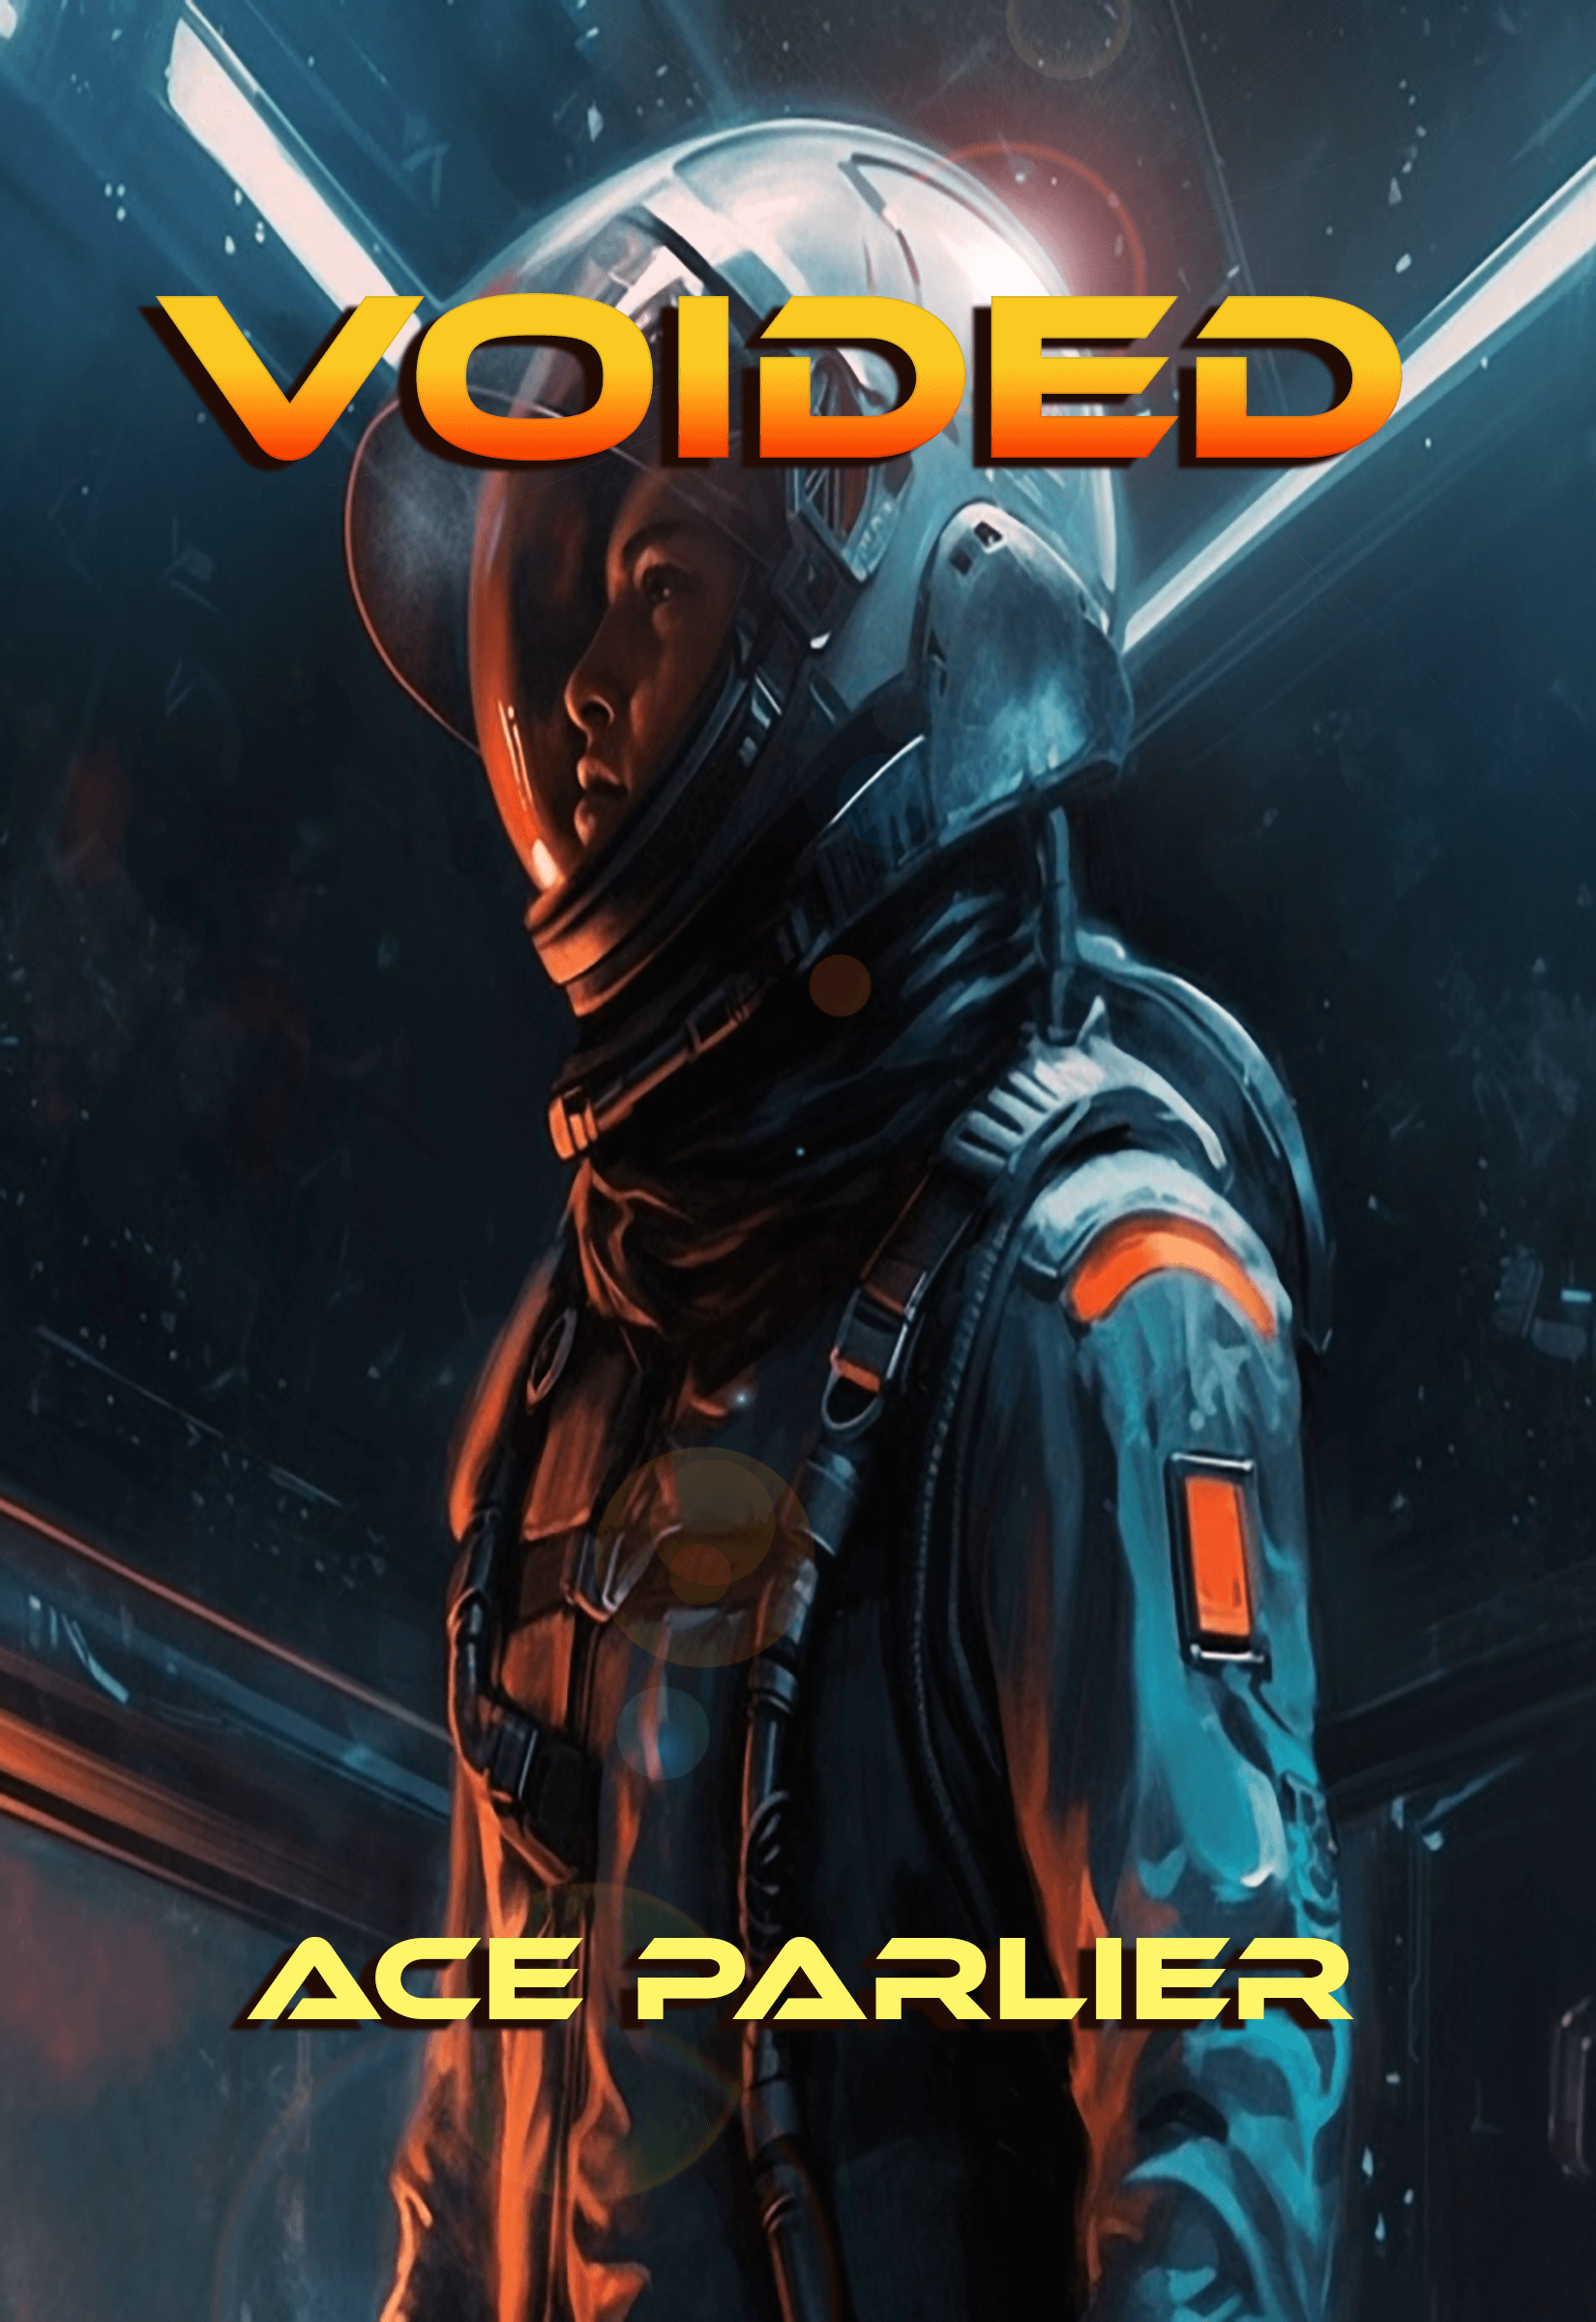 Voided book cover